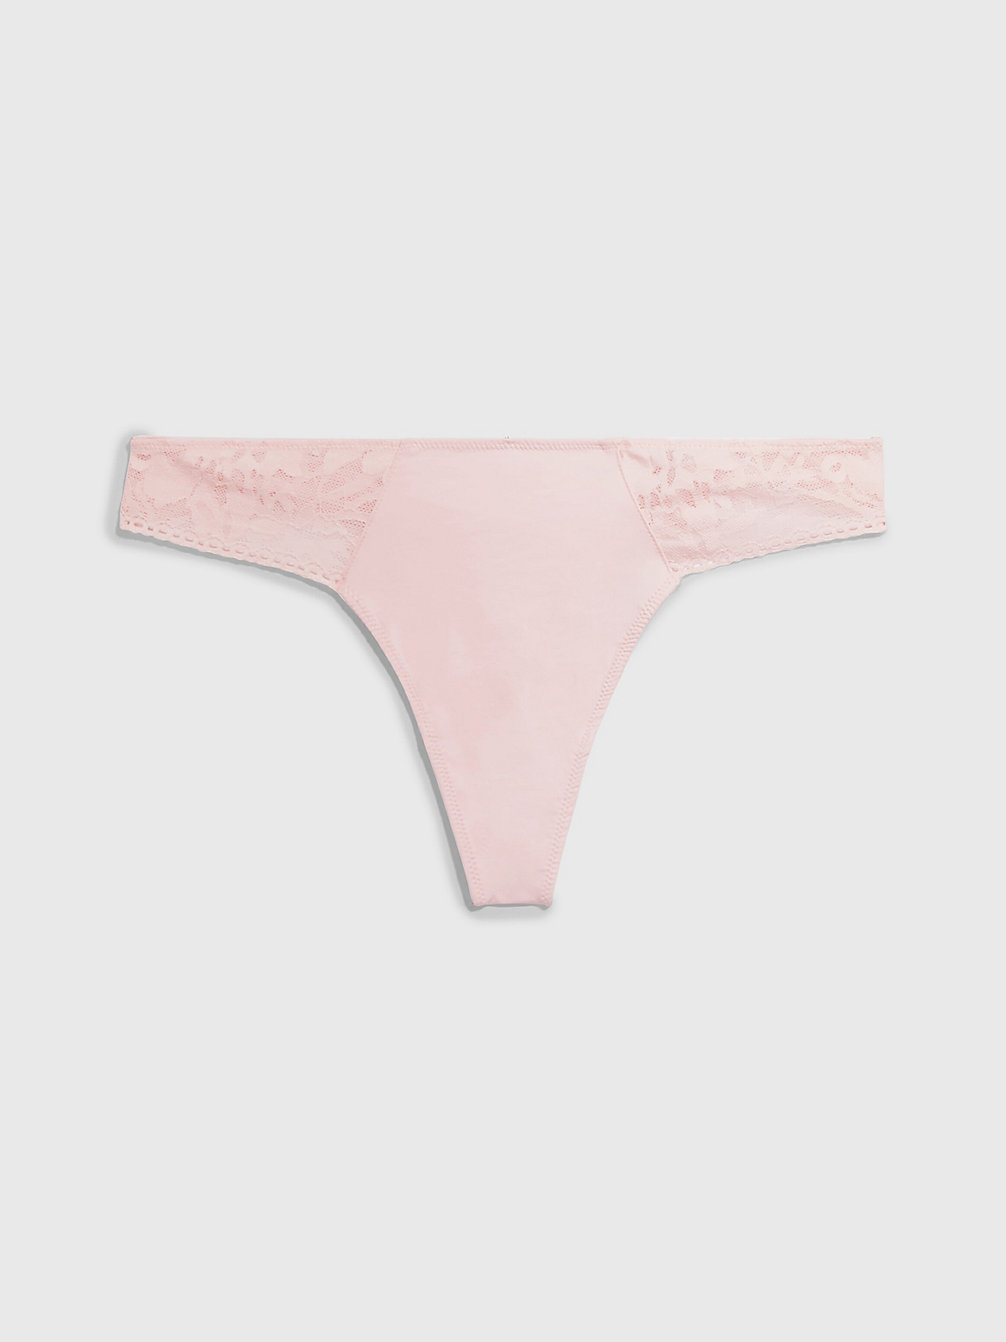 NYMPTHÂ€™S THIGH Thong - Ultra Soft Lace undefined women Calvin Klein